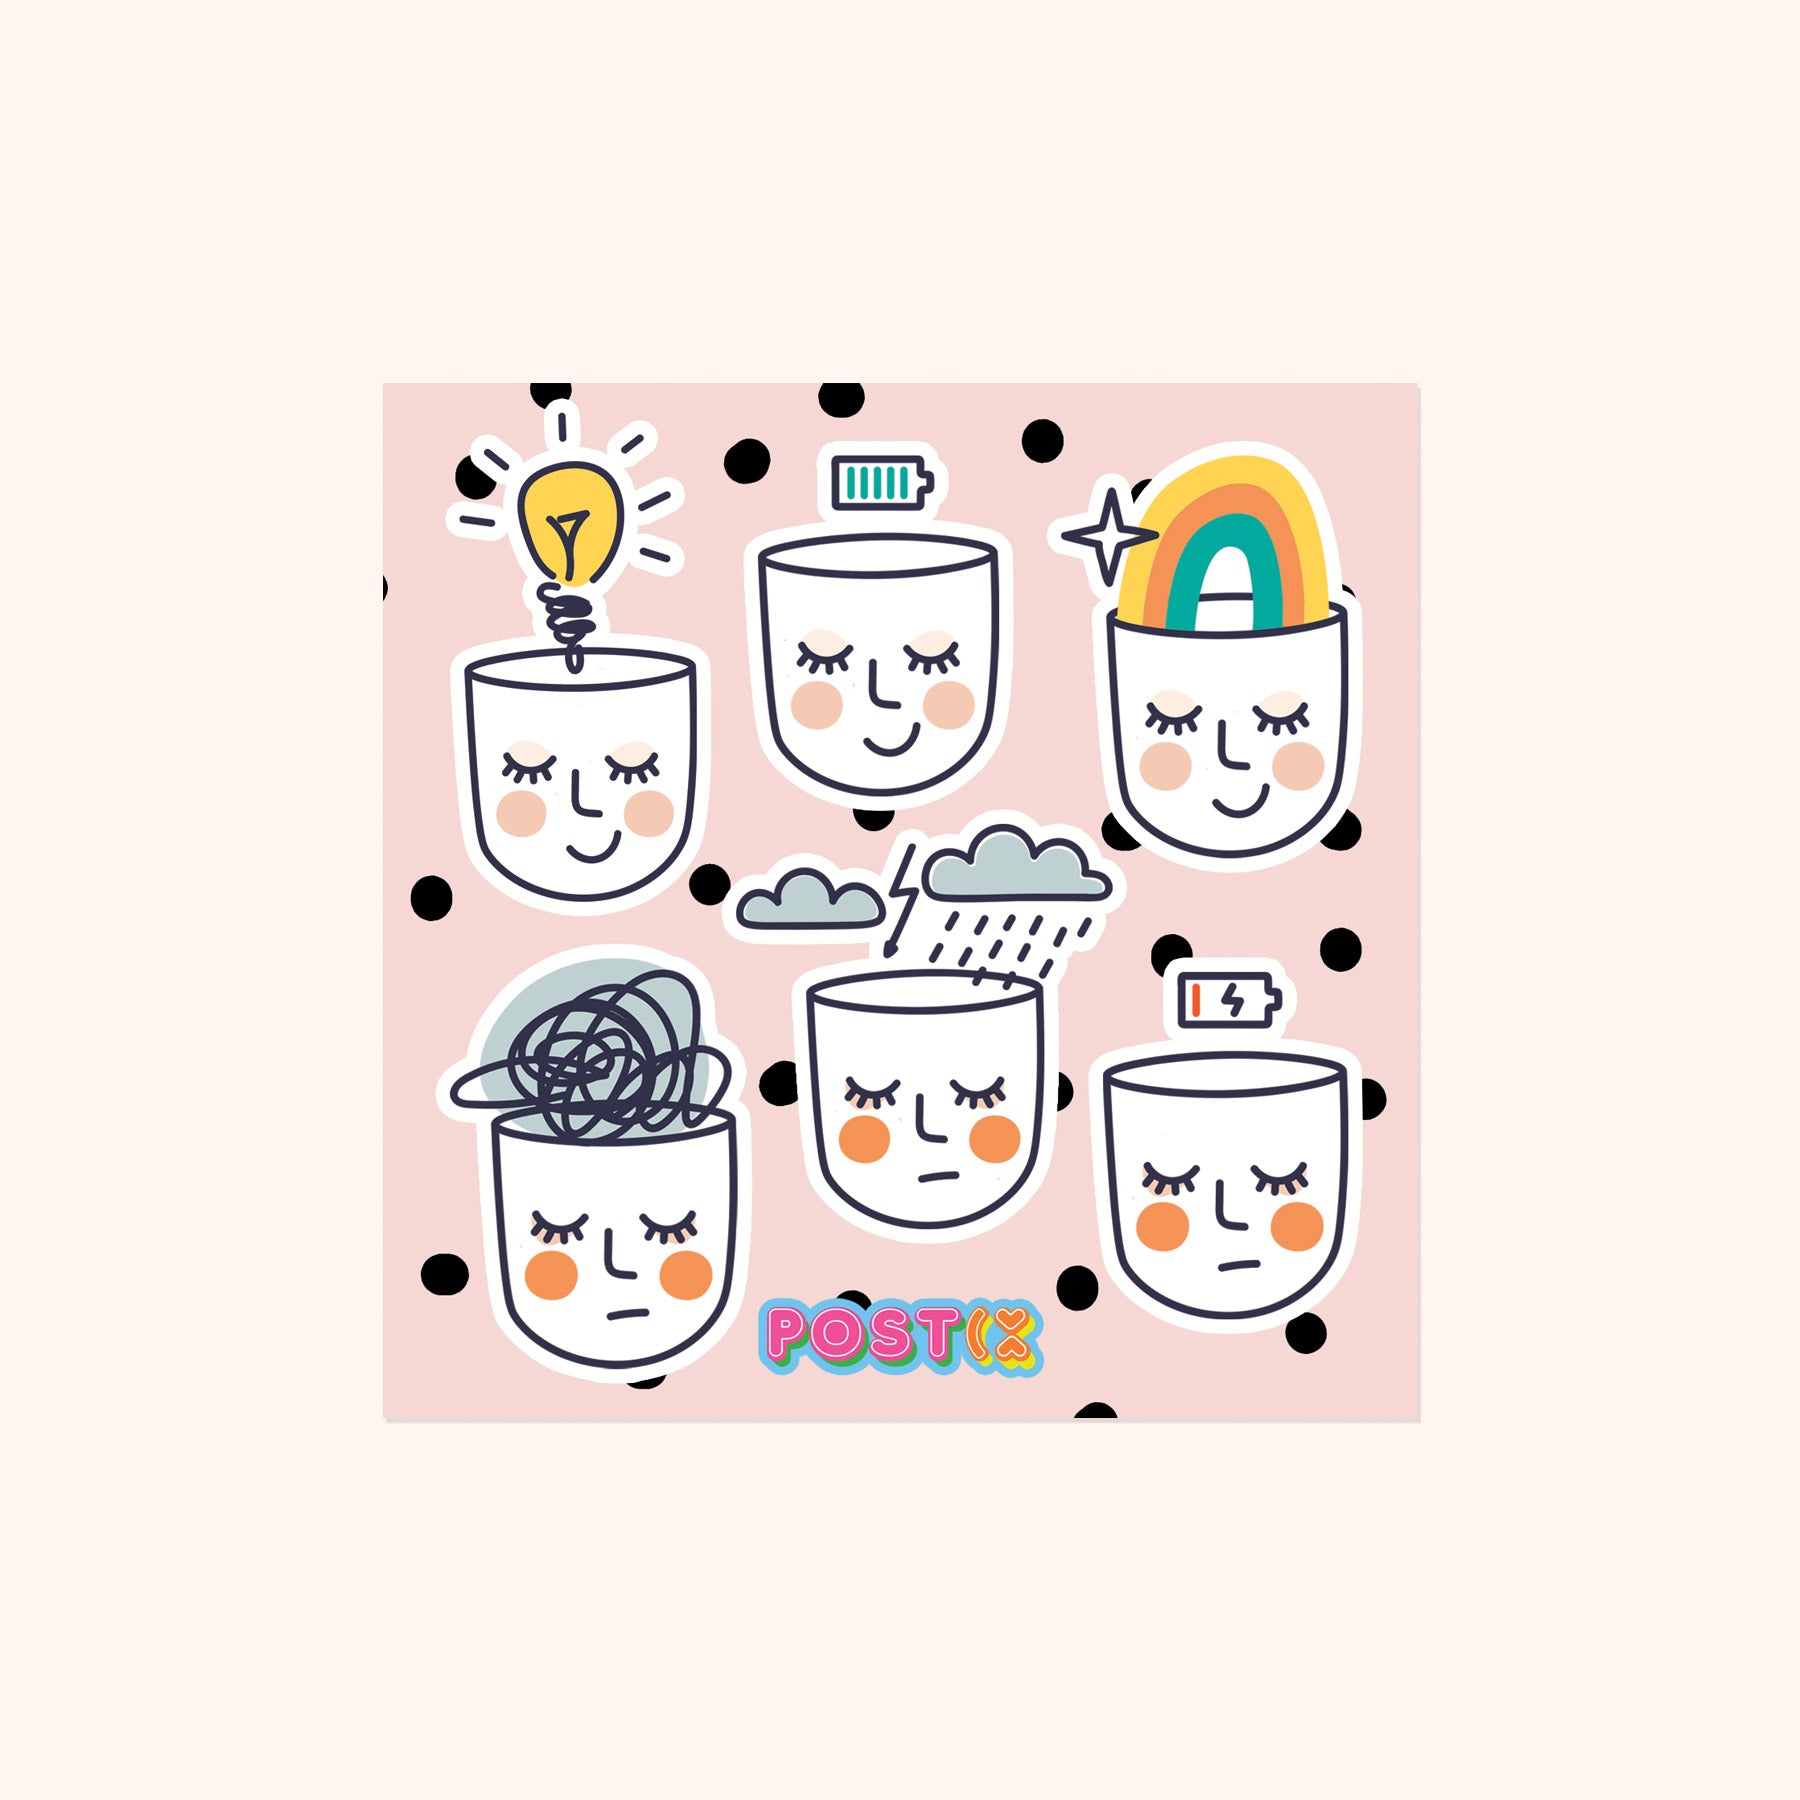 Stickers for positive mental health